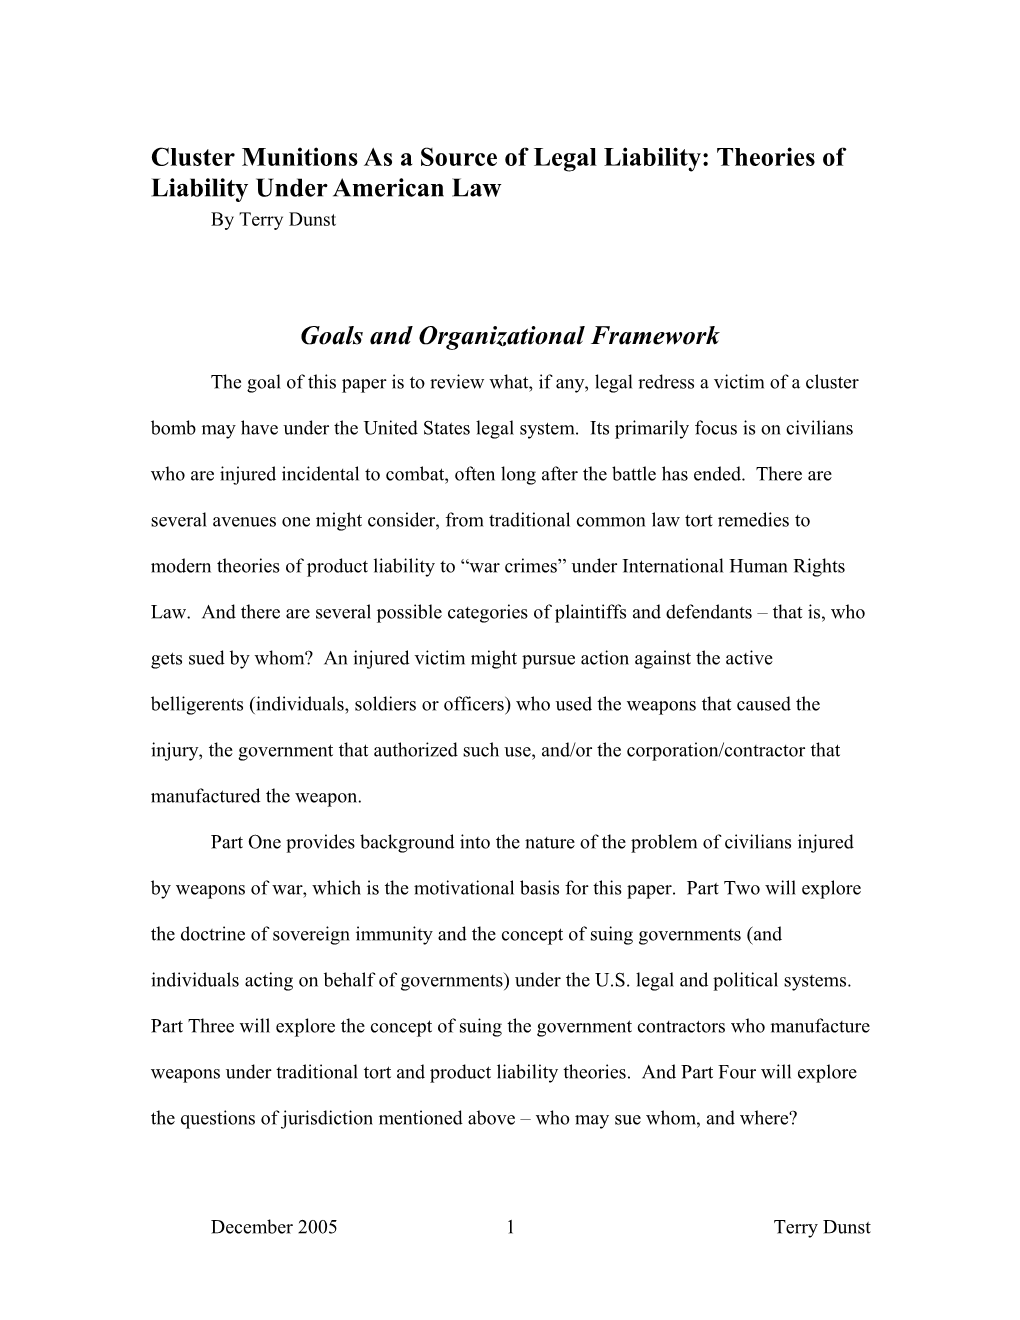 Cluster Munitions As a Source of Legal Liability: Theories of Liability Under American Law